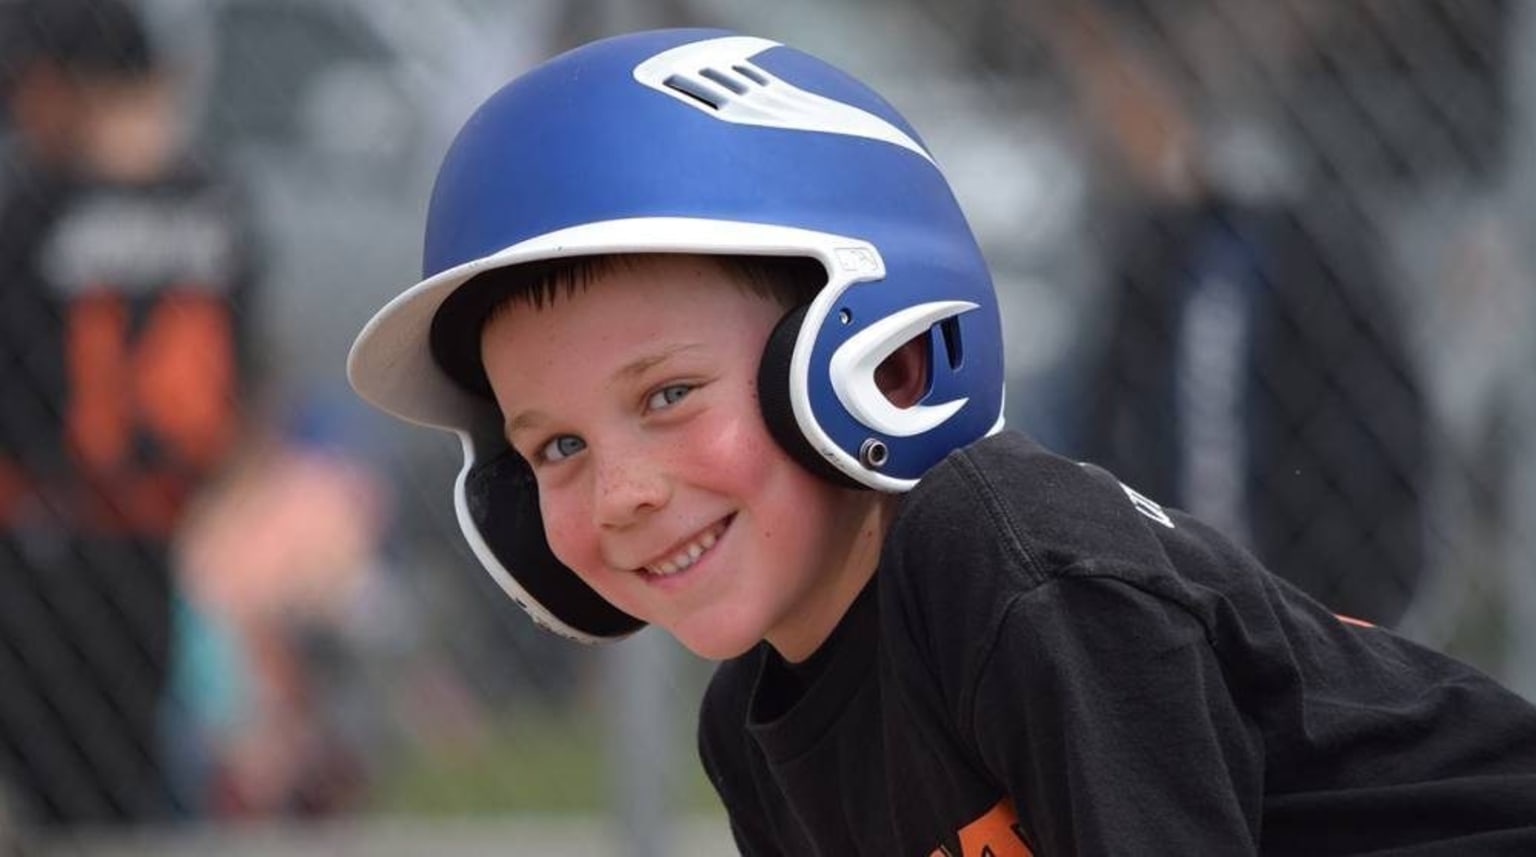 How to Strengthen Your Childs Love of the Game